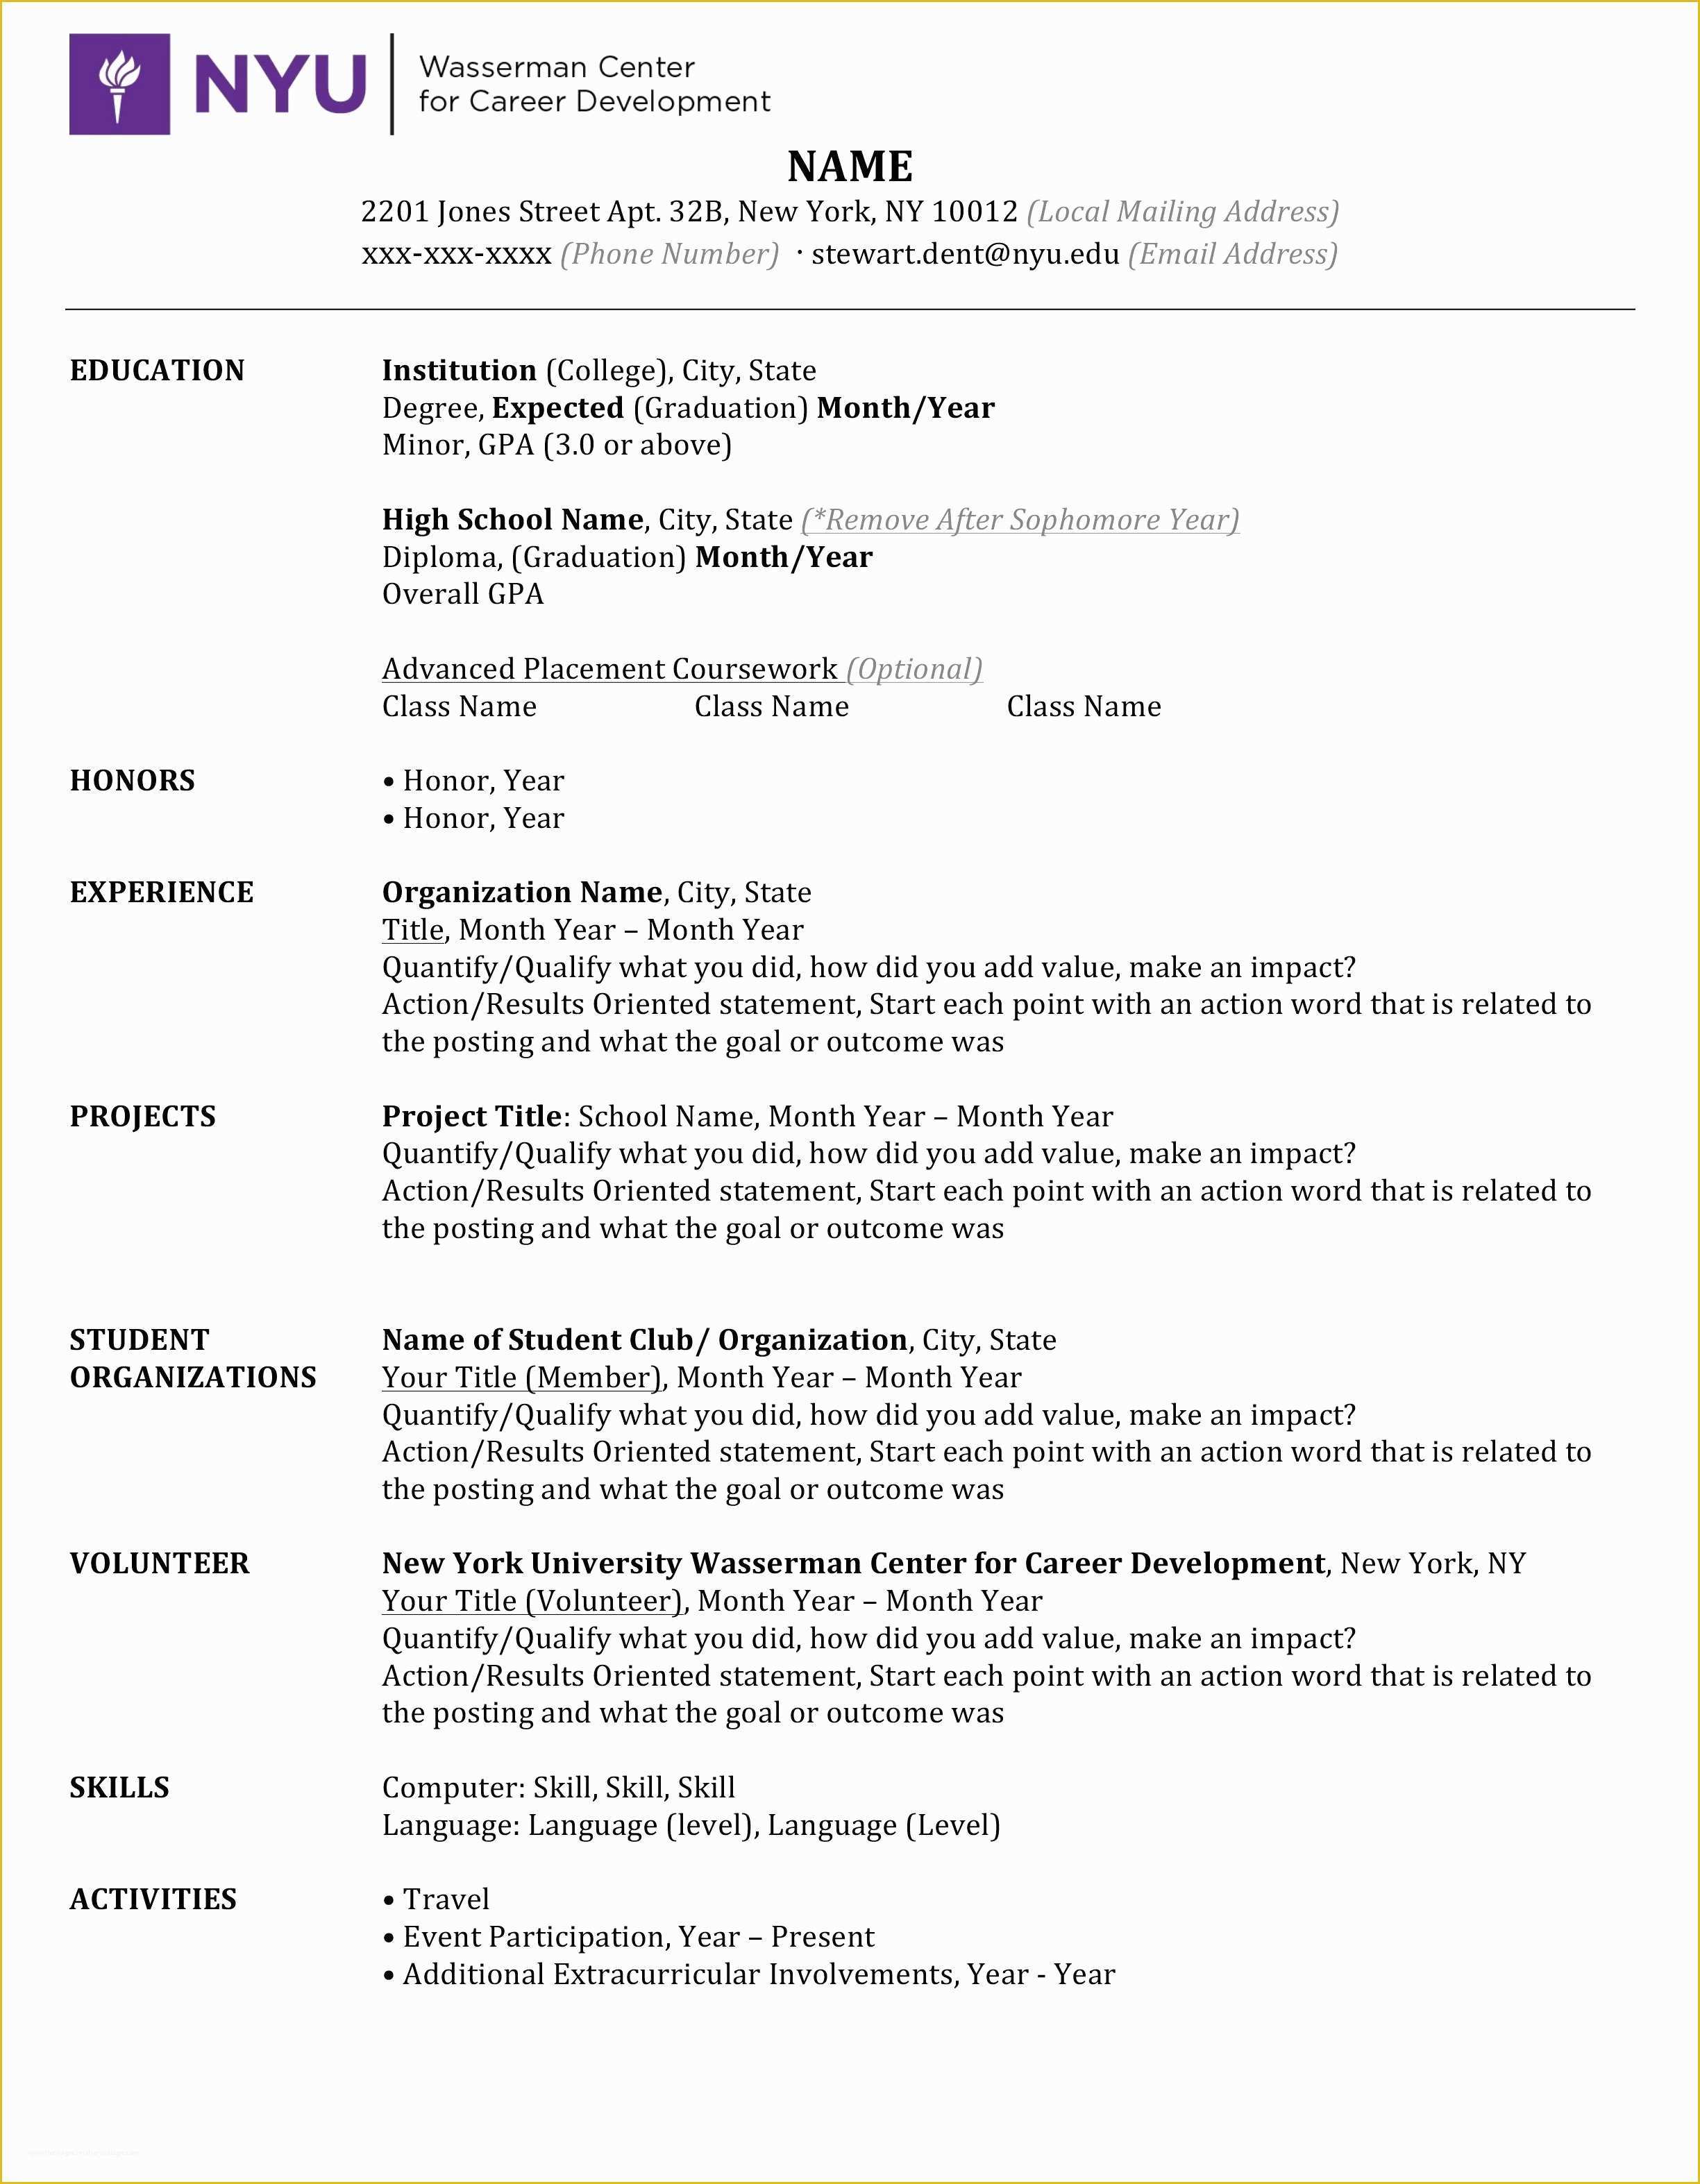 Free Resume Wizard Templates Of Free Resume Wizard Wizards Bined with Templates Best